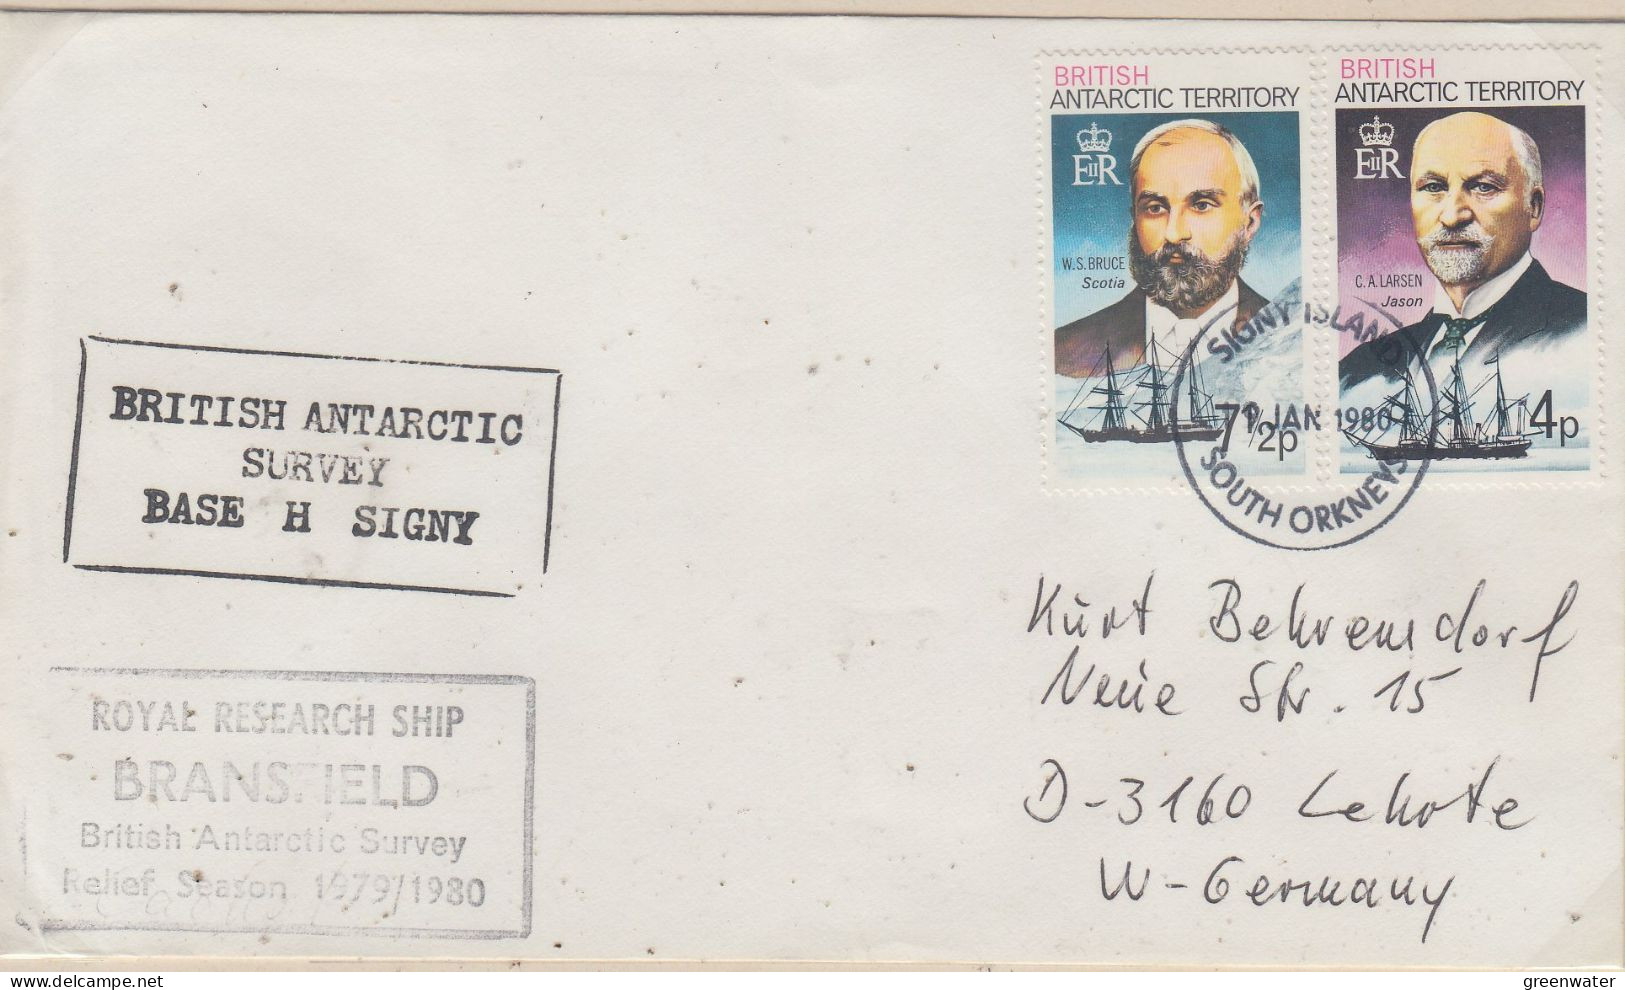 British Antarctic Territorry (BAT) Base H Signy RRS Bransfield Ca Signy Island South Orkneys 9 JAN 1980 (HA154A) - Covers & Documents